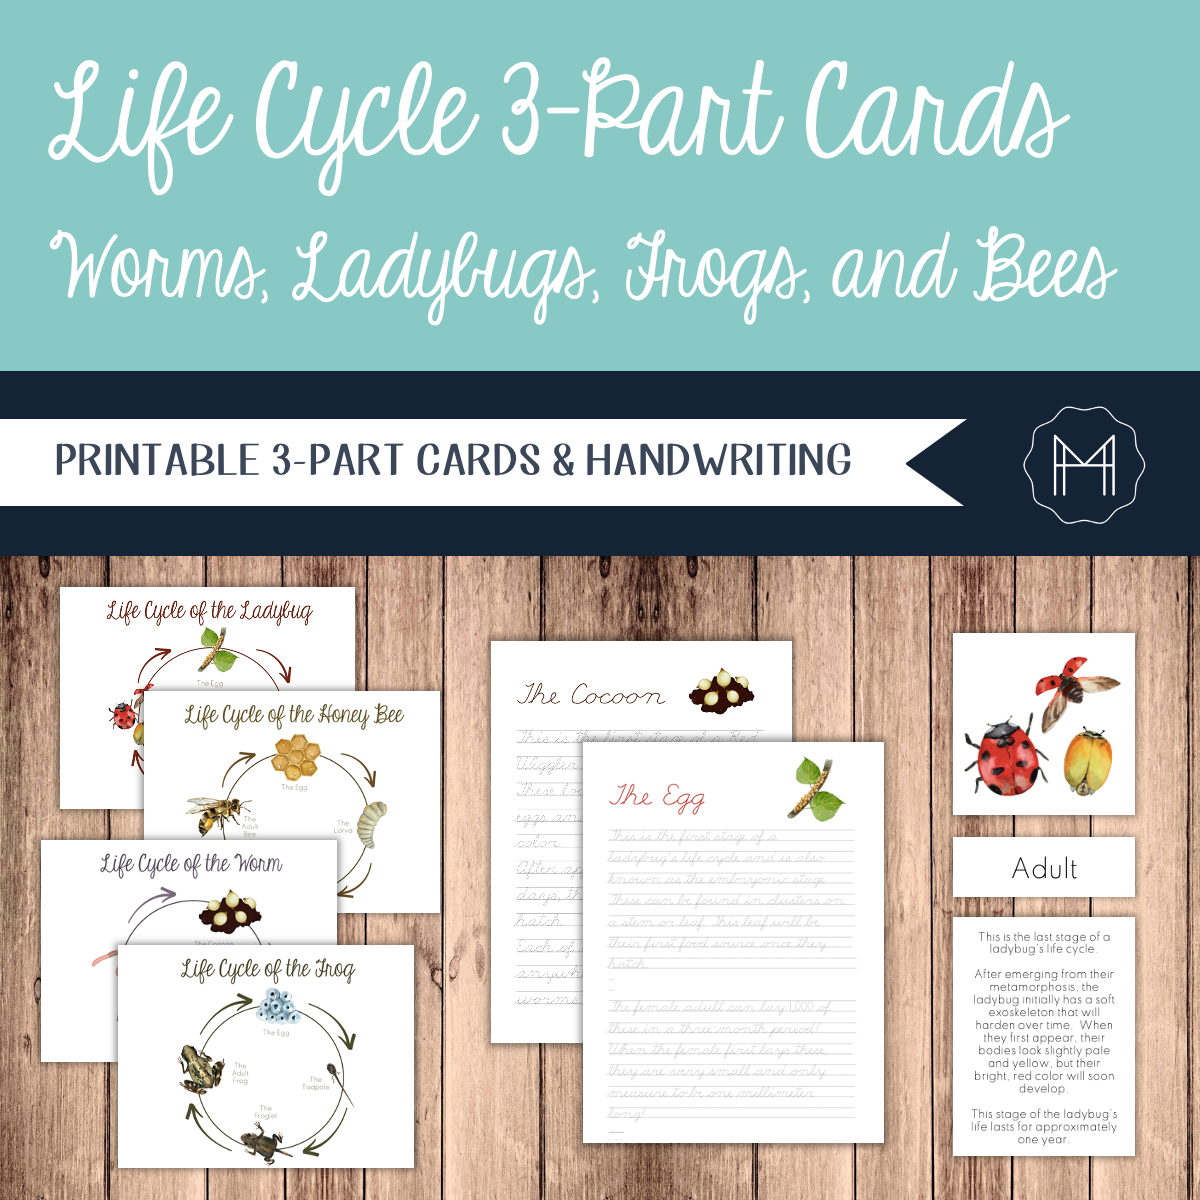 Life Cycles 3-Part Cards: Worms, Ladybugs, Frogs, and Bees